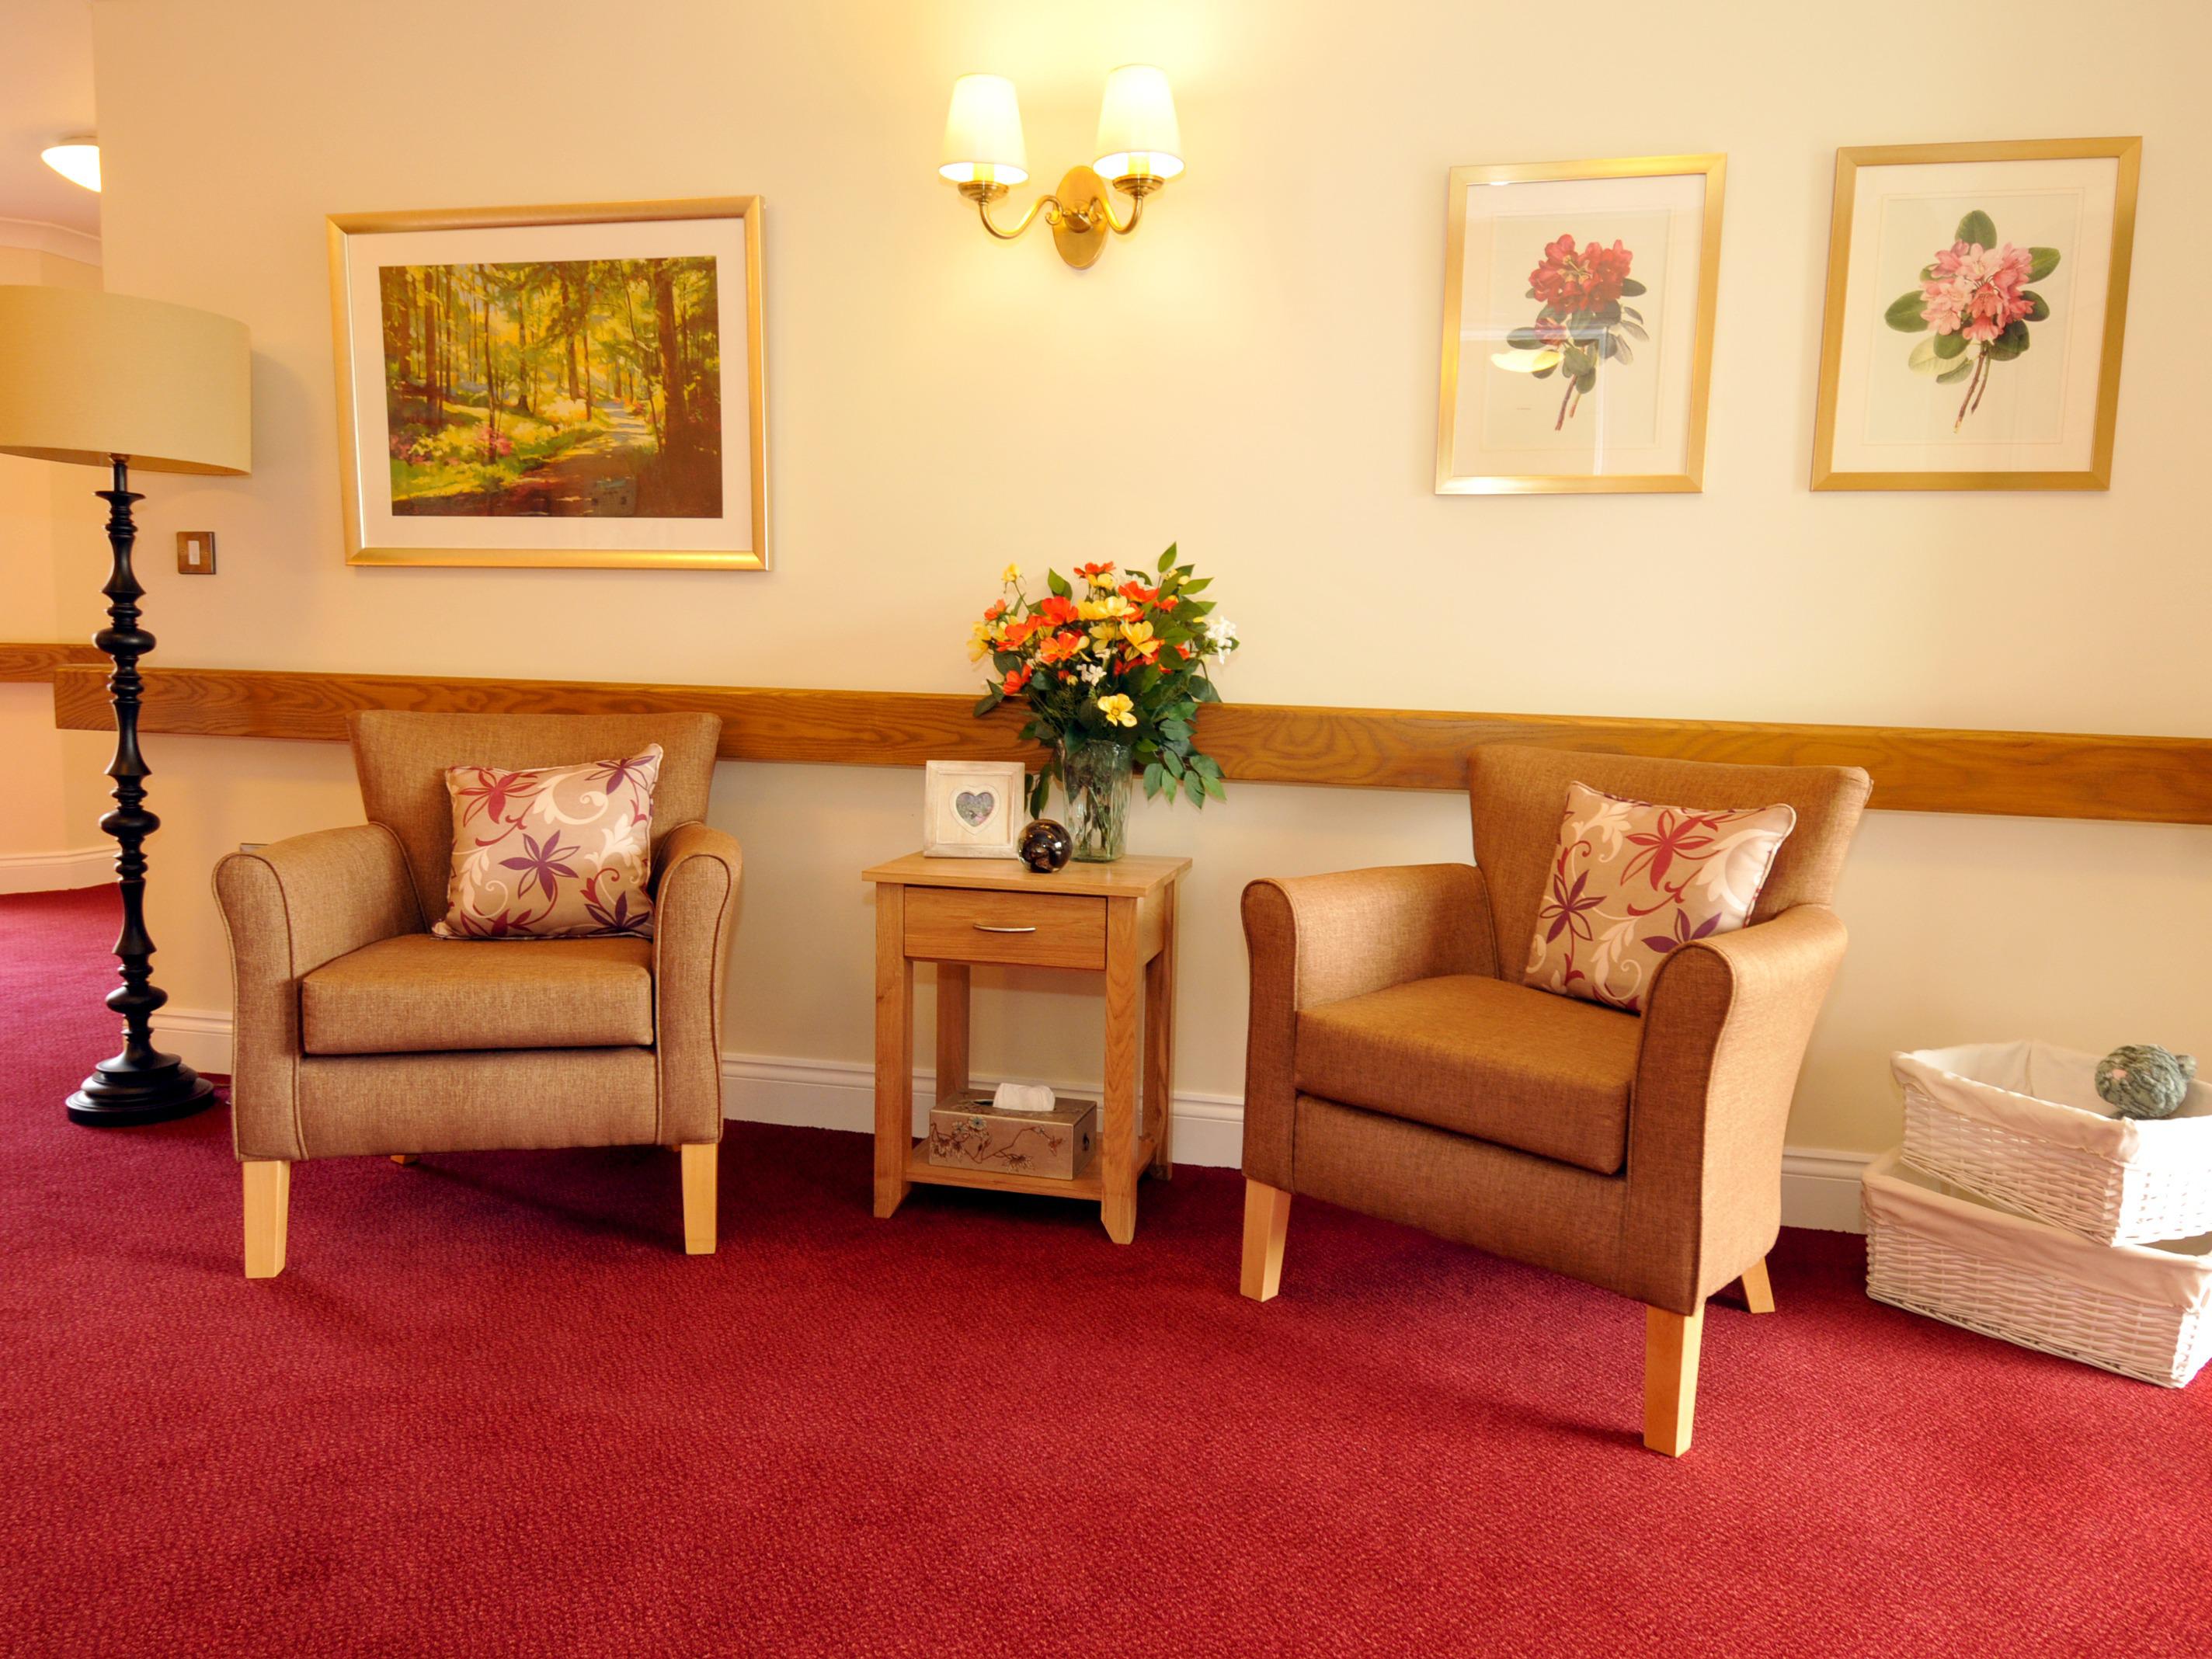 Images Barchester - Harper Fields Care Home